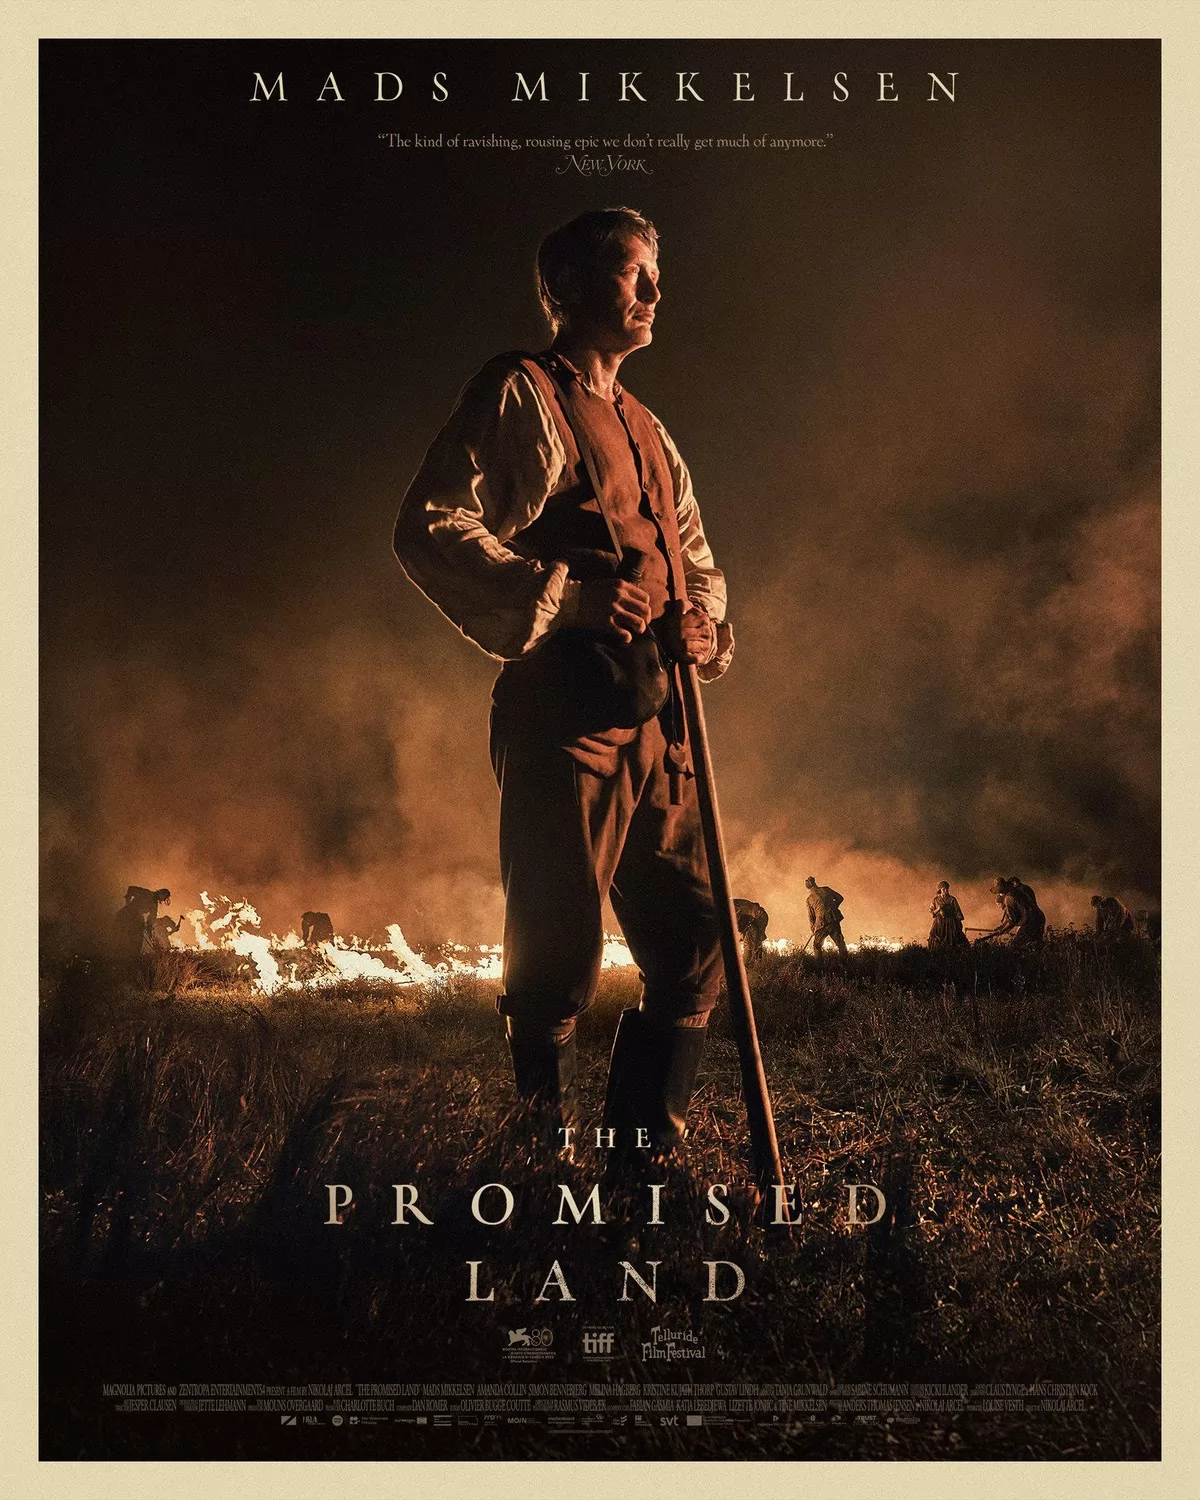 The Promised Land (2023)